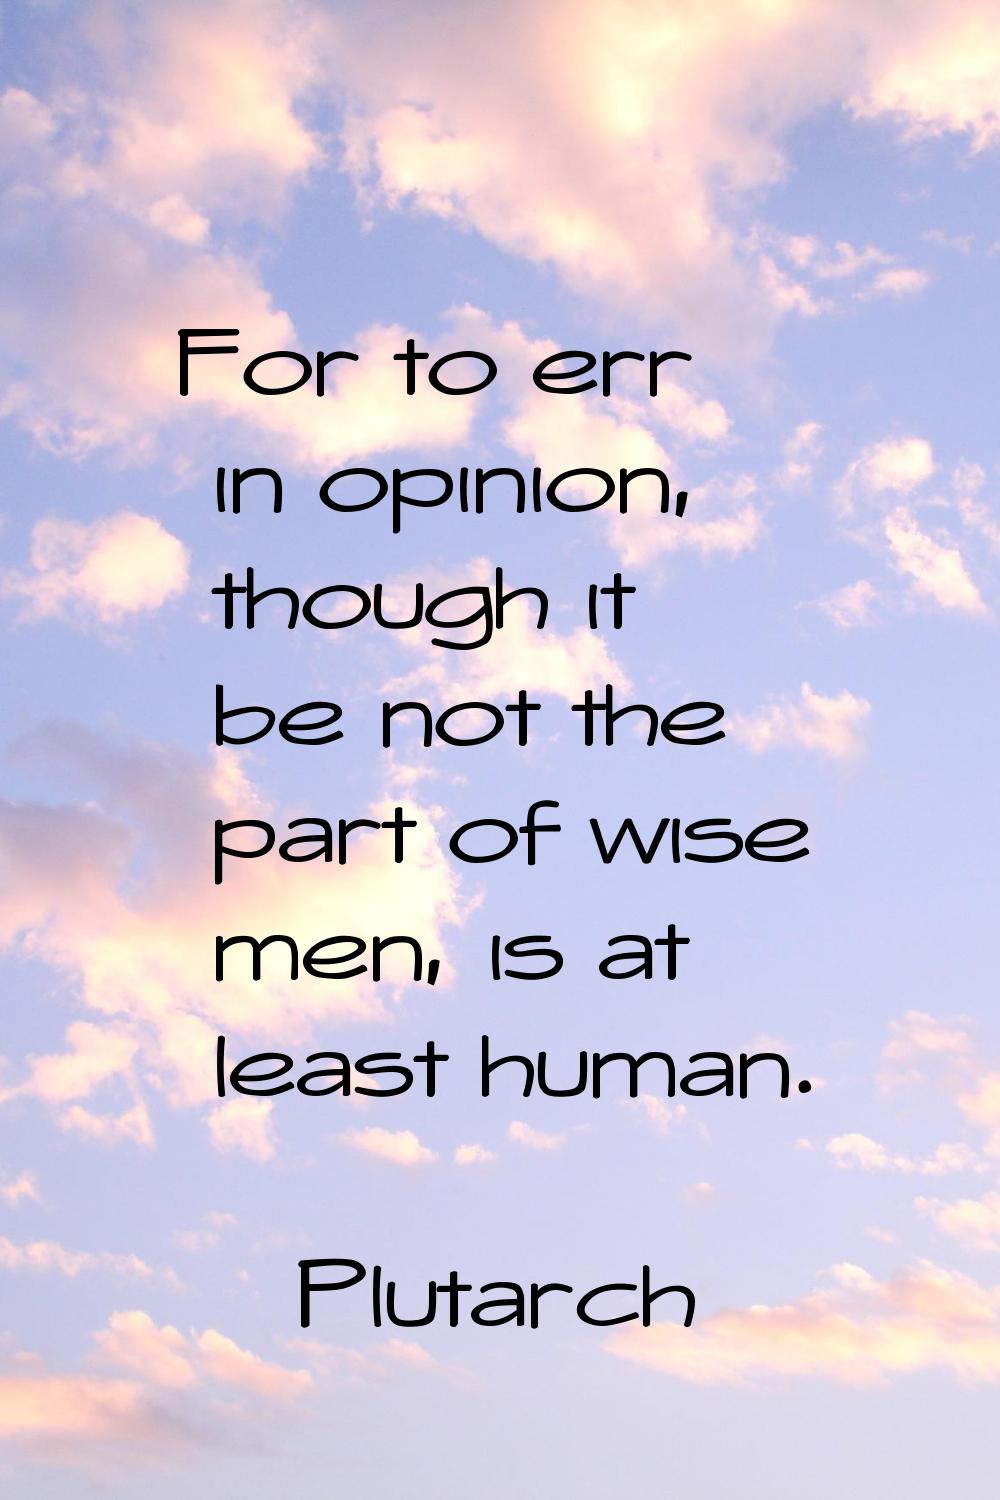 For to err in opinion, though it be not the part of wise men, is at least human.